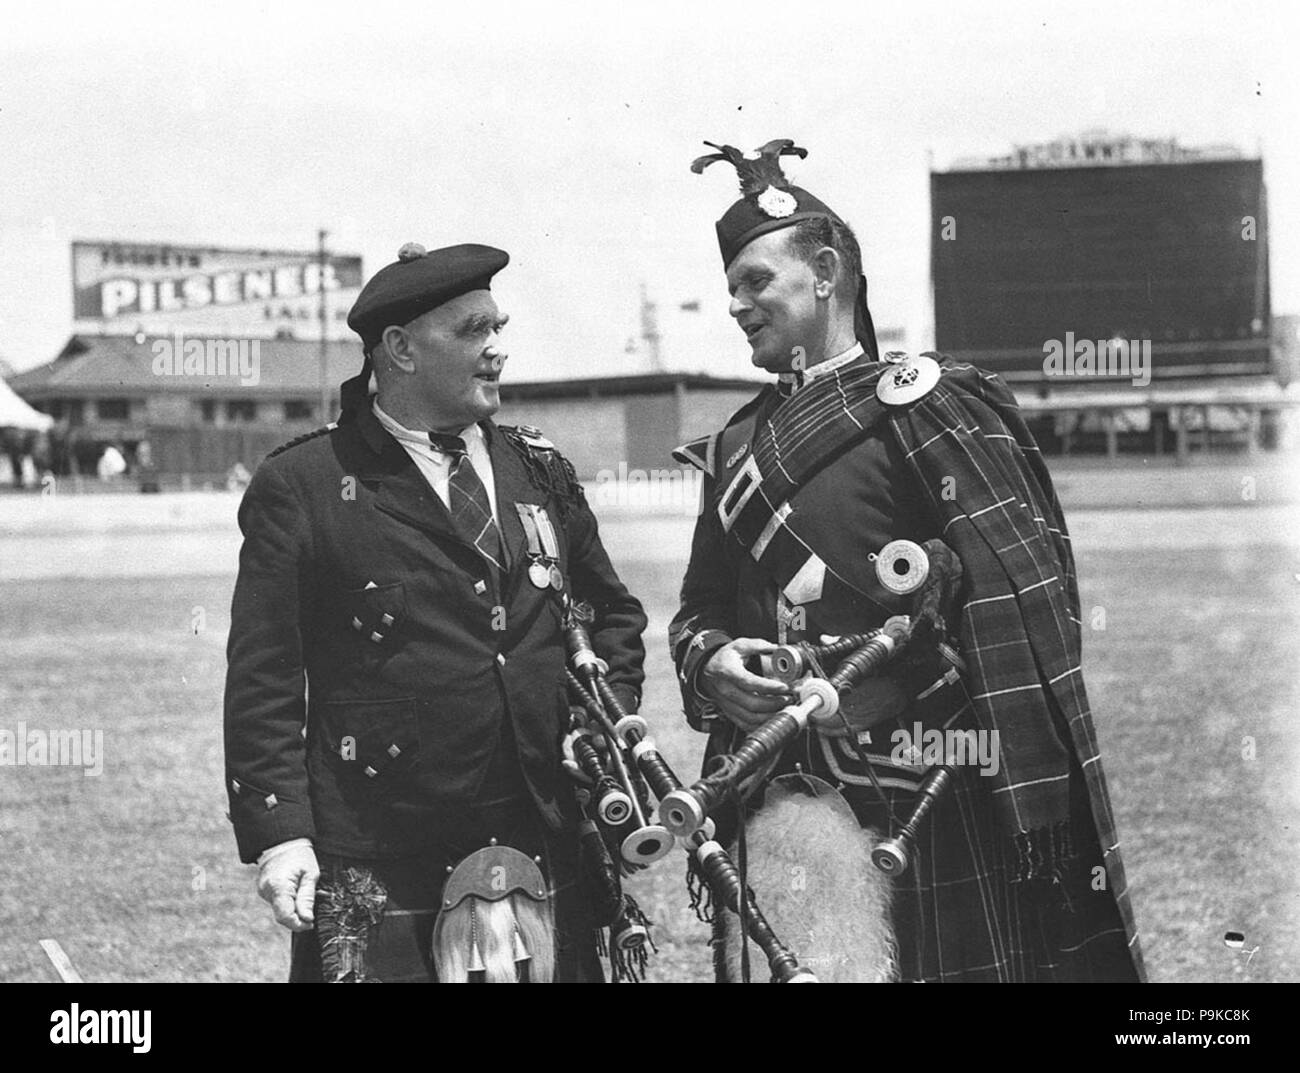 265 SLNSW 43462 Two Highland pipers talking together at the Highland Societys Caledonian Games Stock Photo